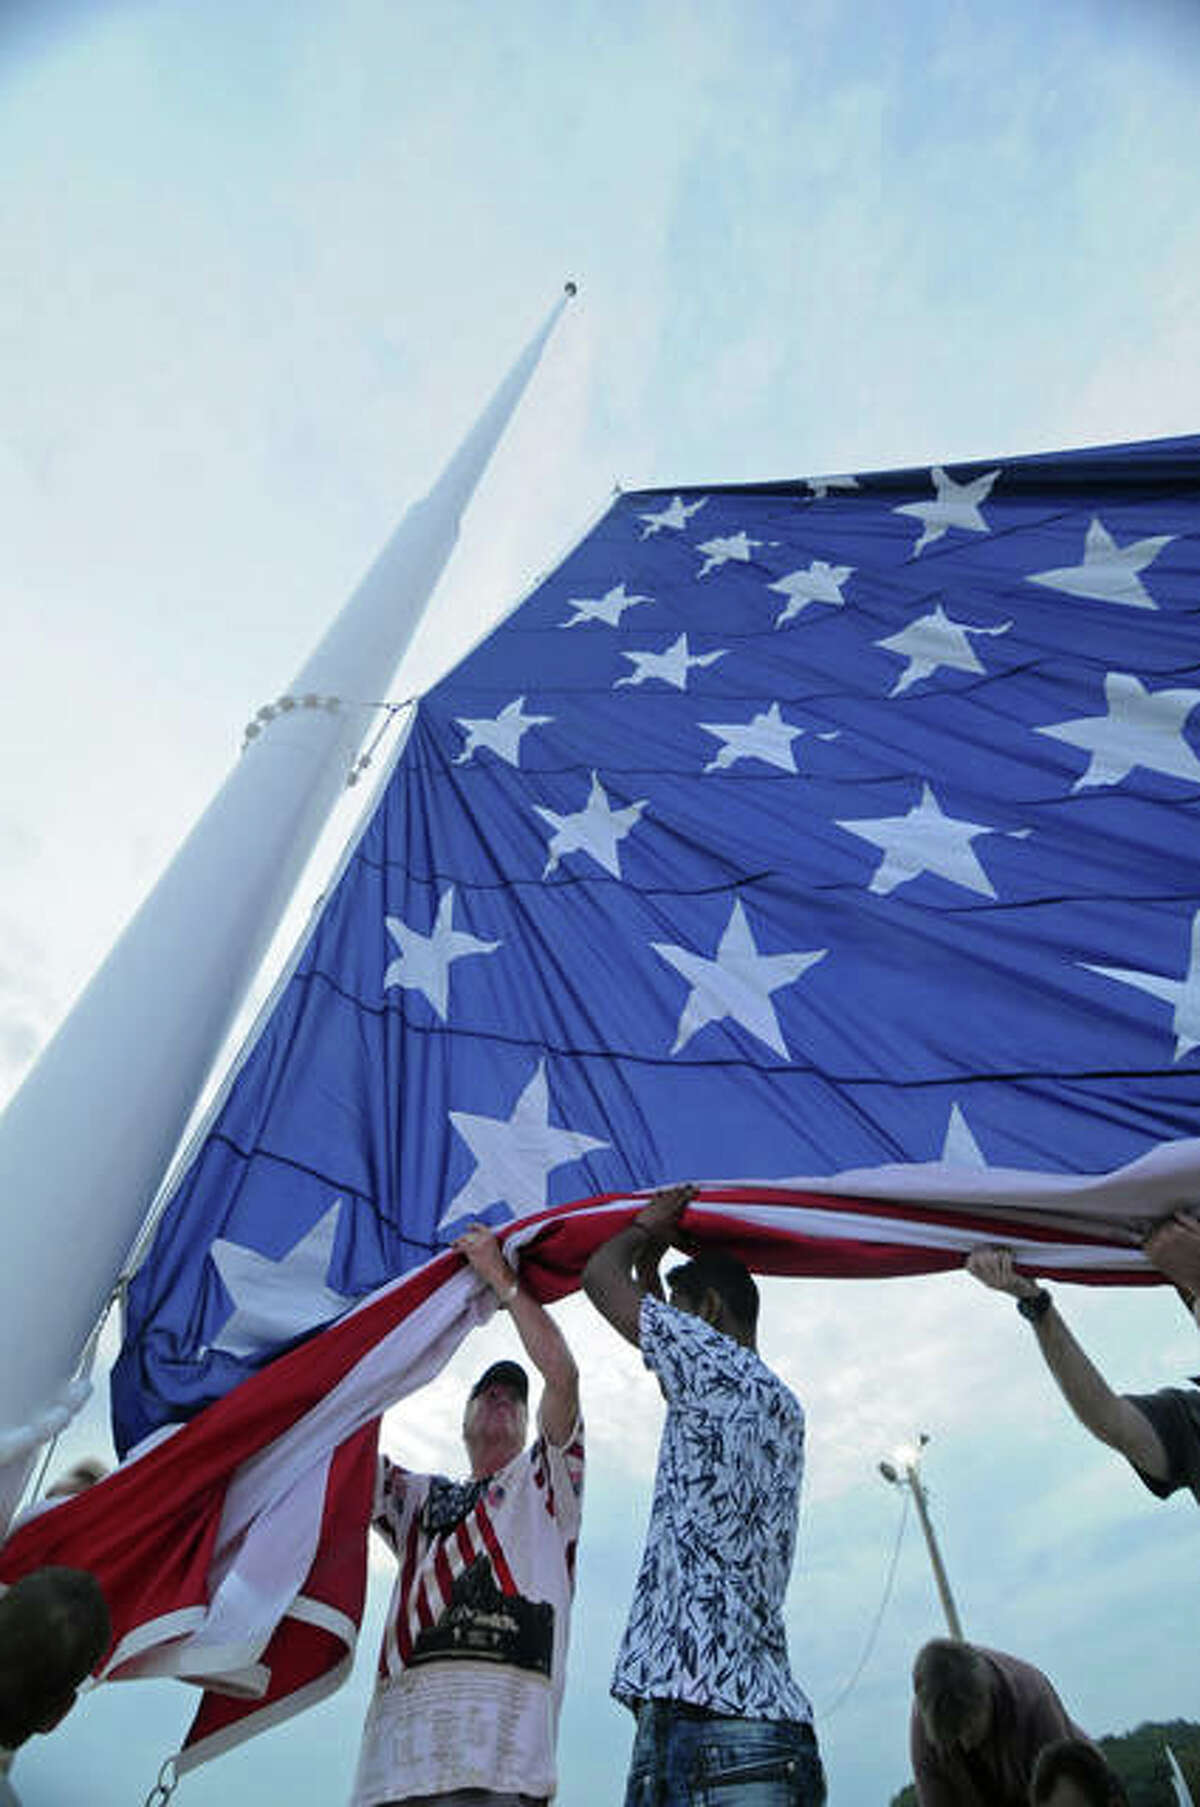 A team of veterans and first responders begin to hoist a giant flag in Grafton for the first time on Saturday. An estimated 1,000 people attended the ceremony for the 40-by-80-foot American flag that will fly from a 130-foot flag pole in Grafton Lighthouse Park at the confluence of the Mississippi and Illinois Rivers.